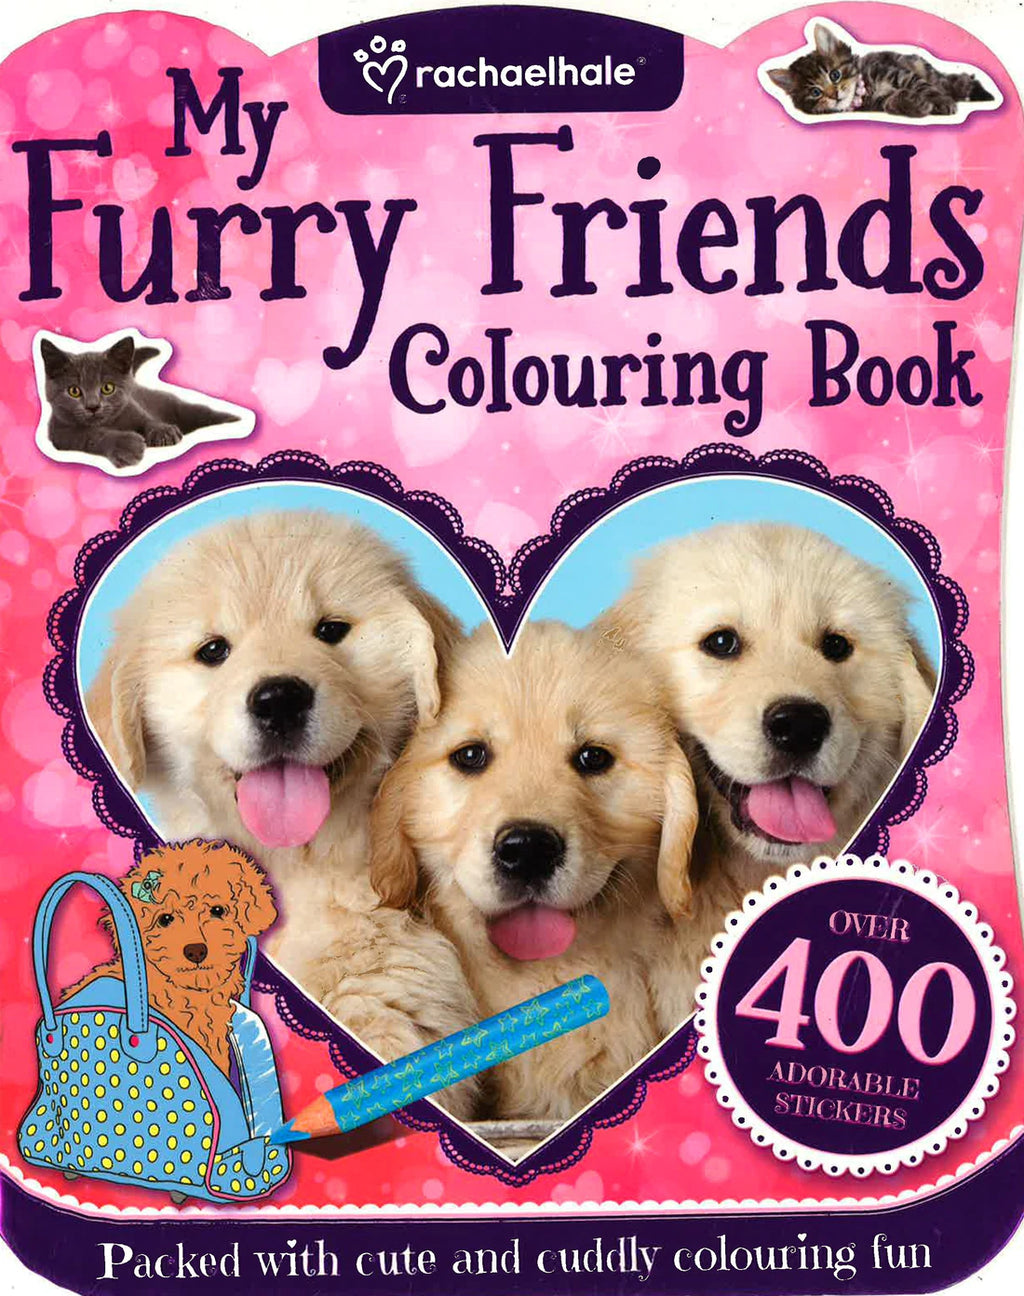 My Fury Friends Colouring Book